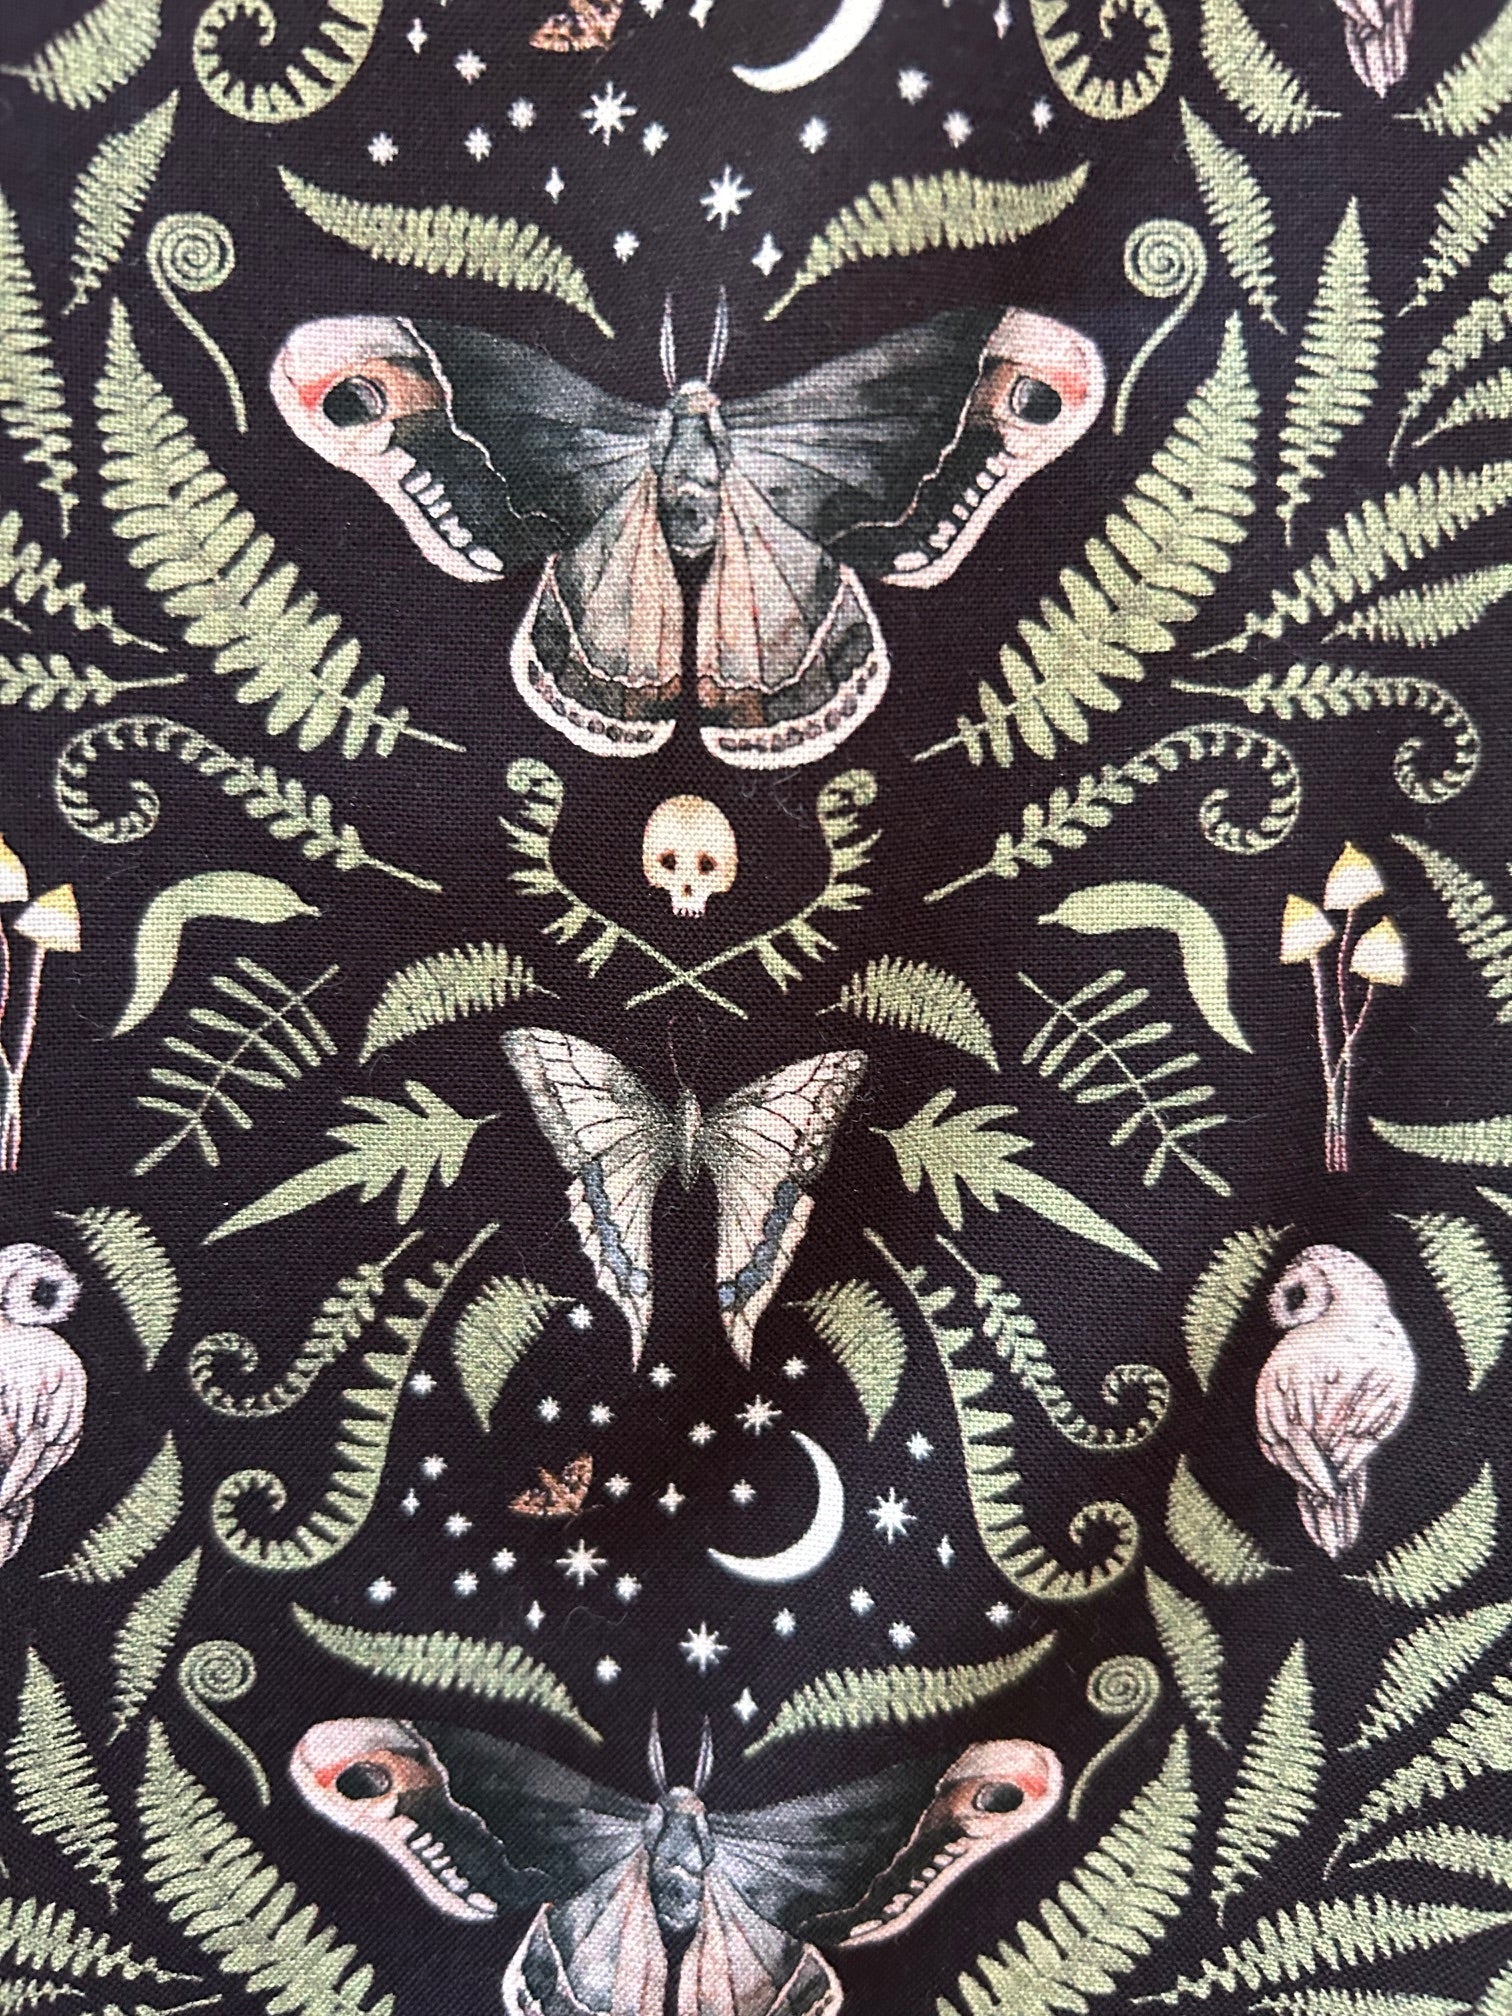 a close up of the print on the fabric showing moths, skulls, owls and leaves on black background